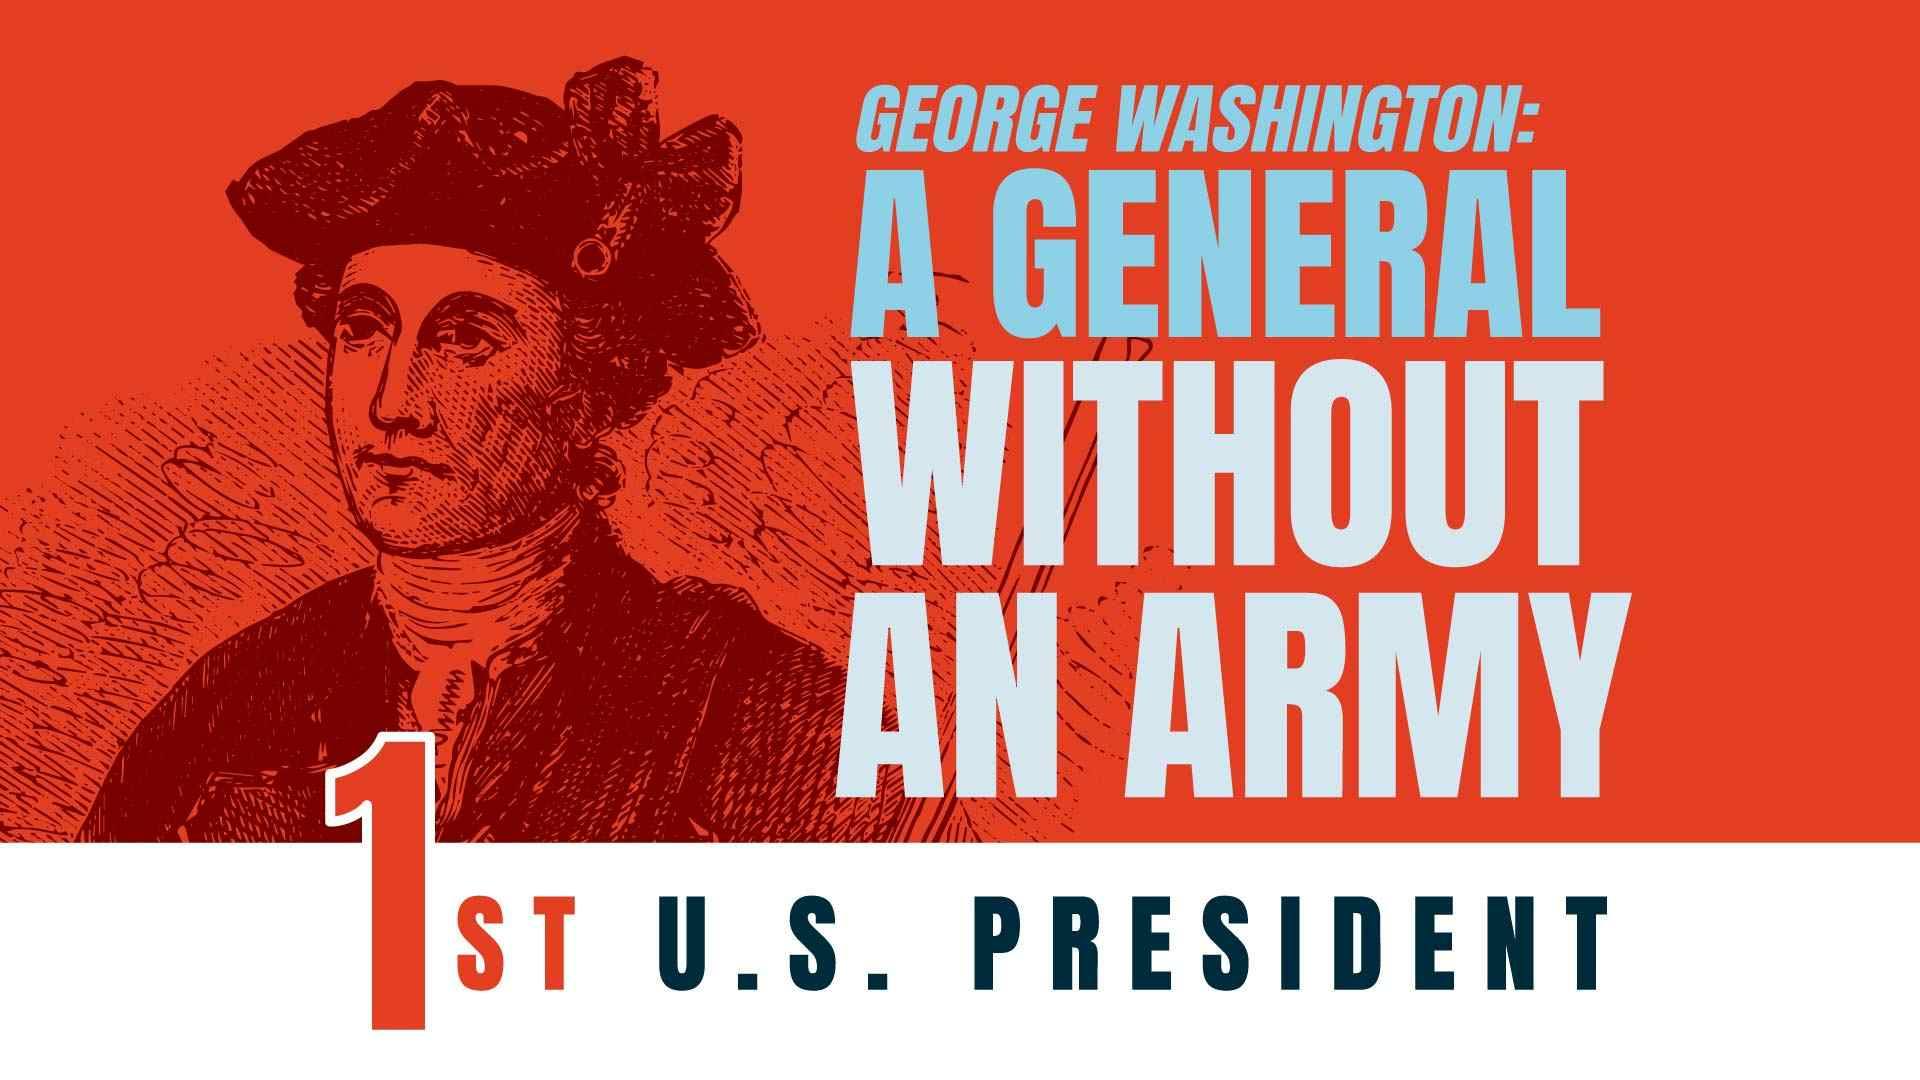 George Washington: A General without an Army